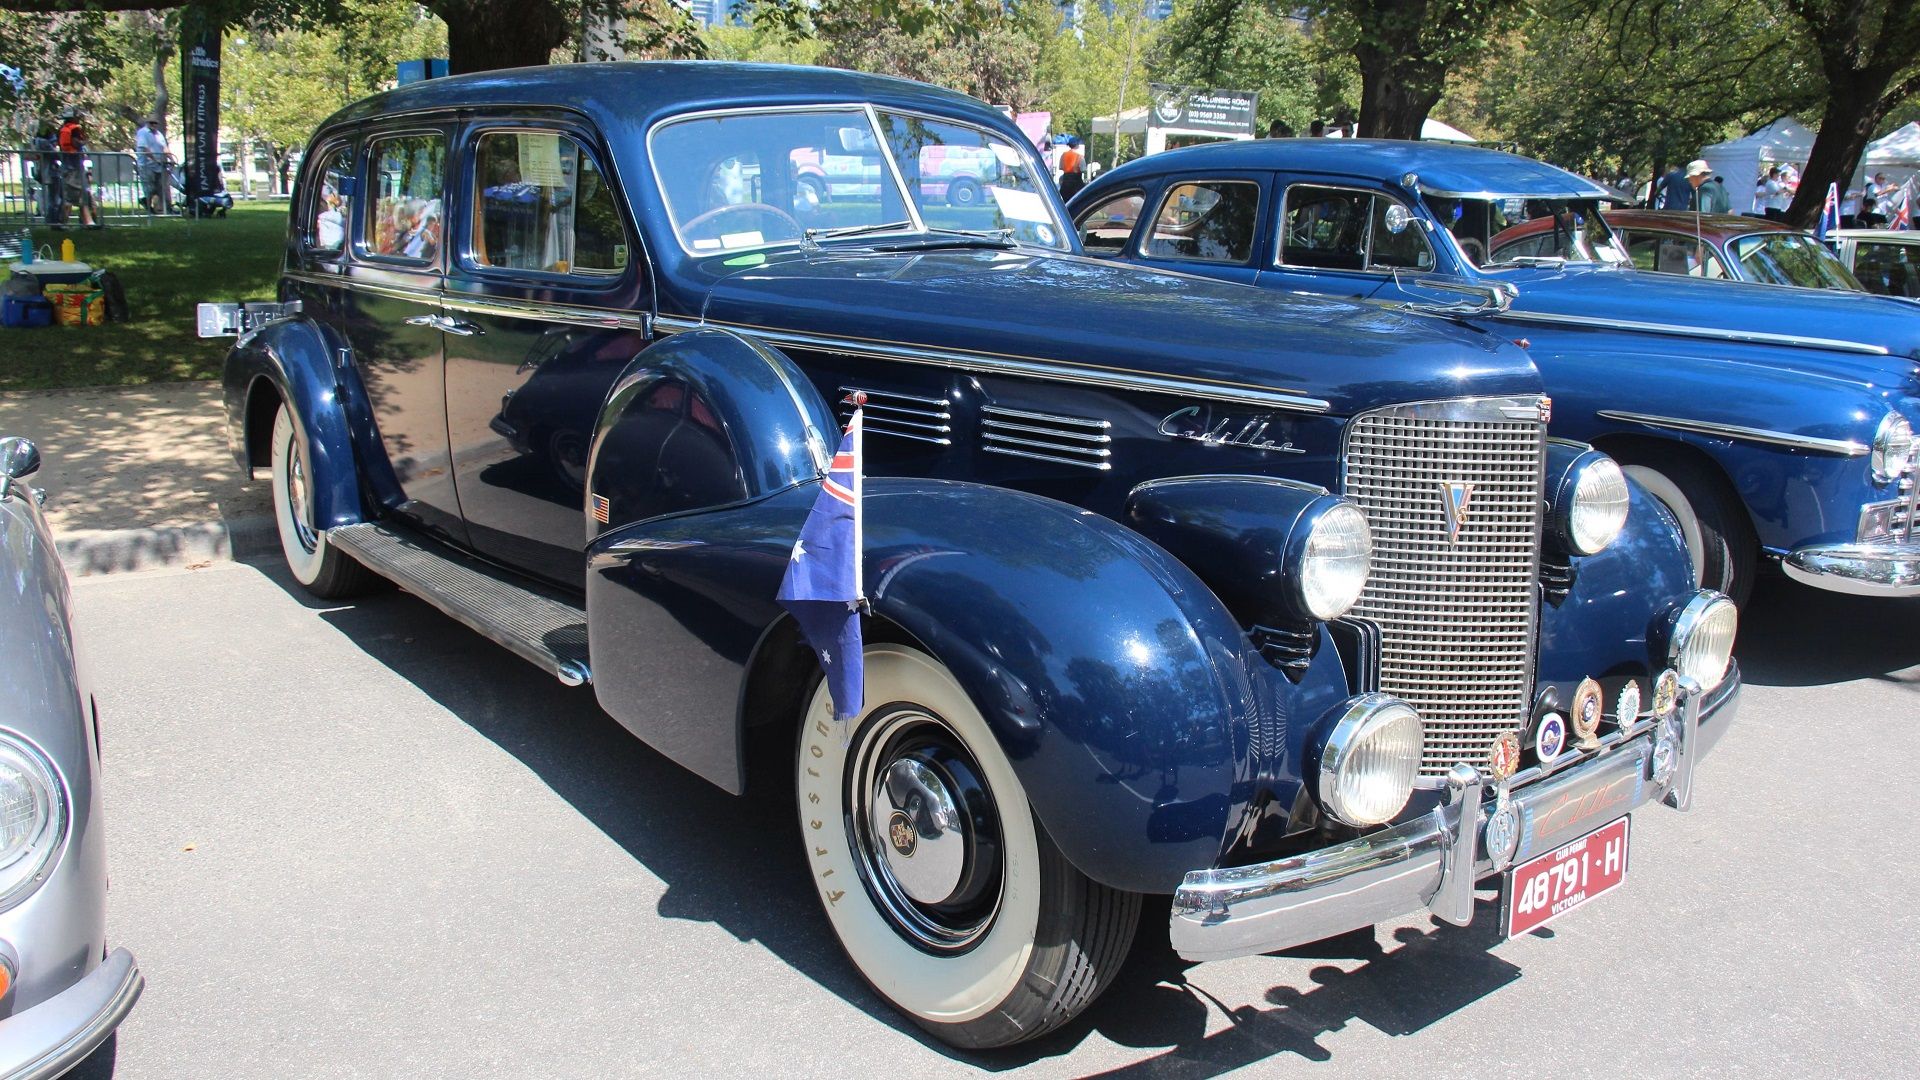 A parked 1938 Cadillac Series 75 Limousine on display